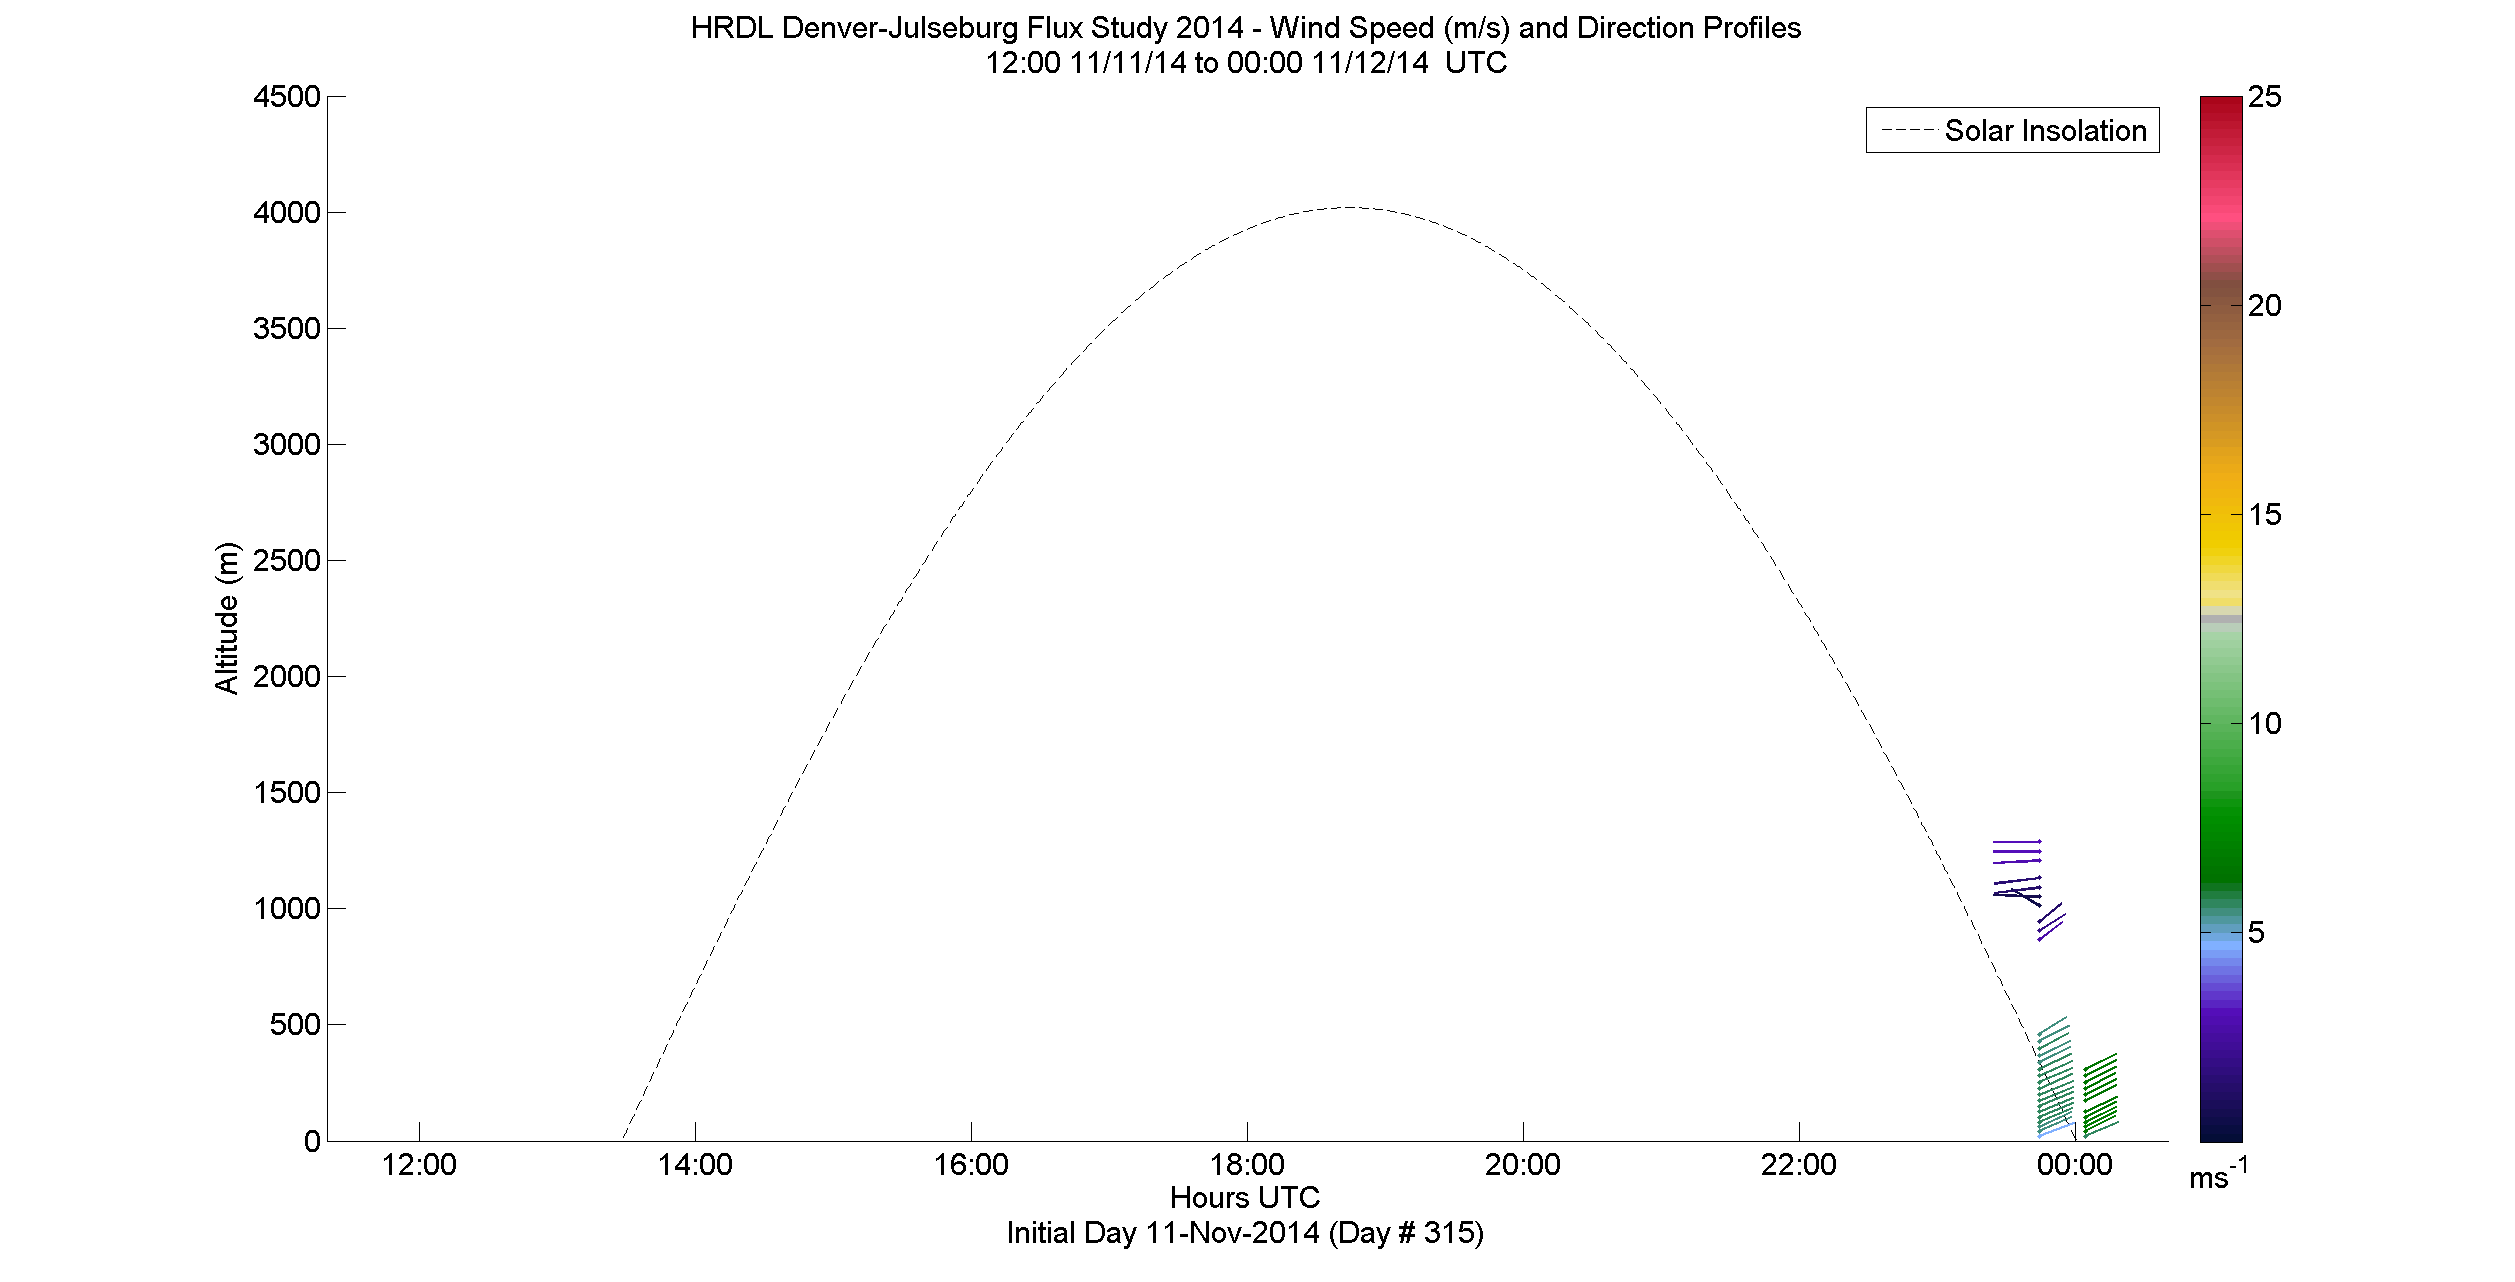 HRDL speed and direction profile - November 11 pm